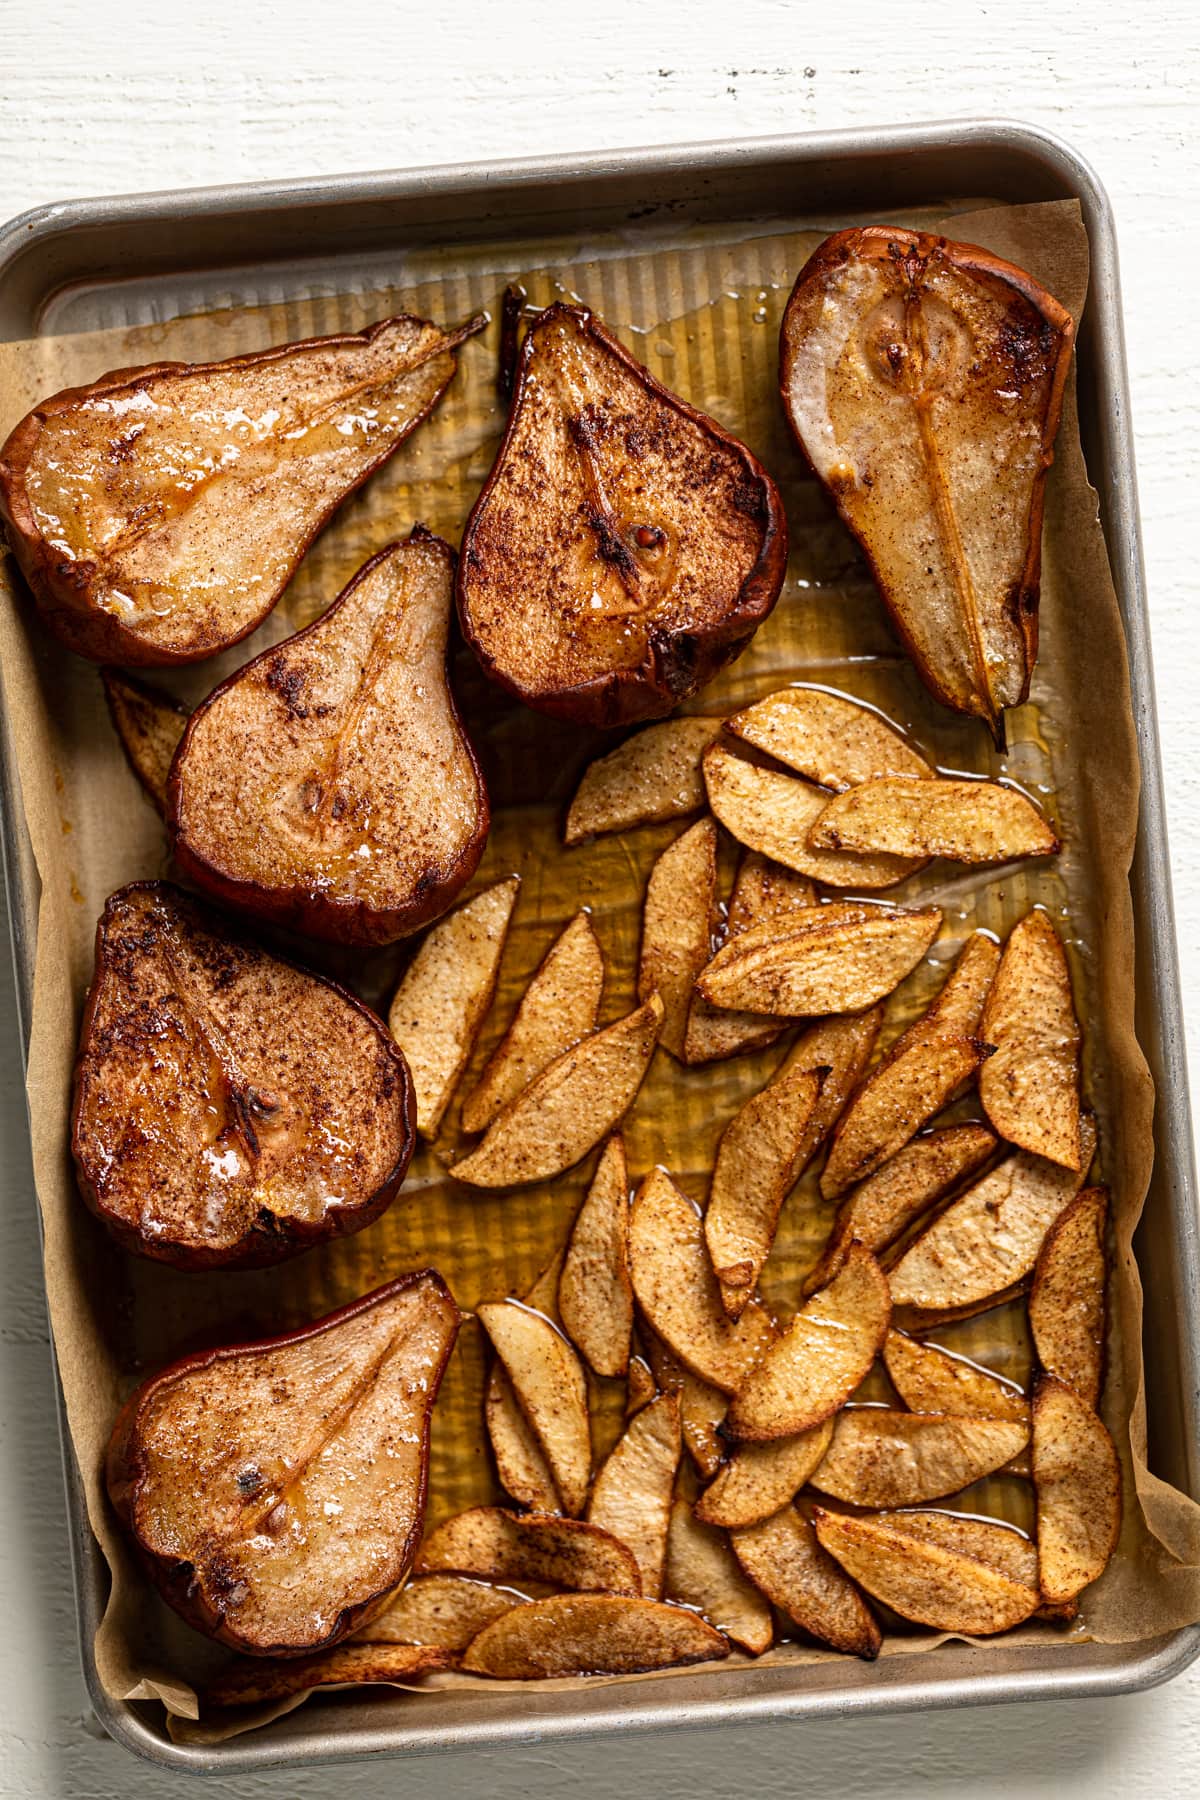 Roasted apple slices and halved pears on a baking sheet